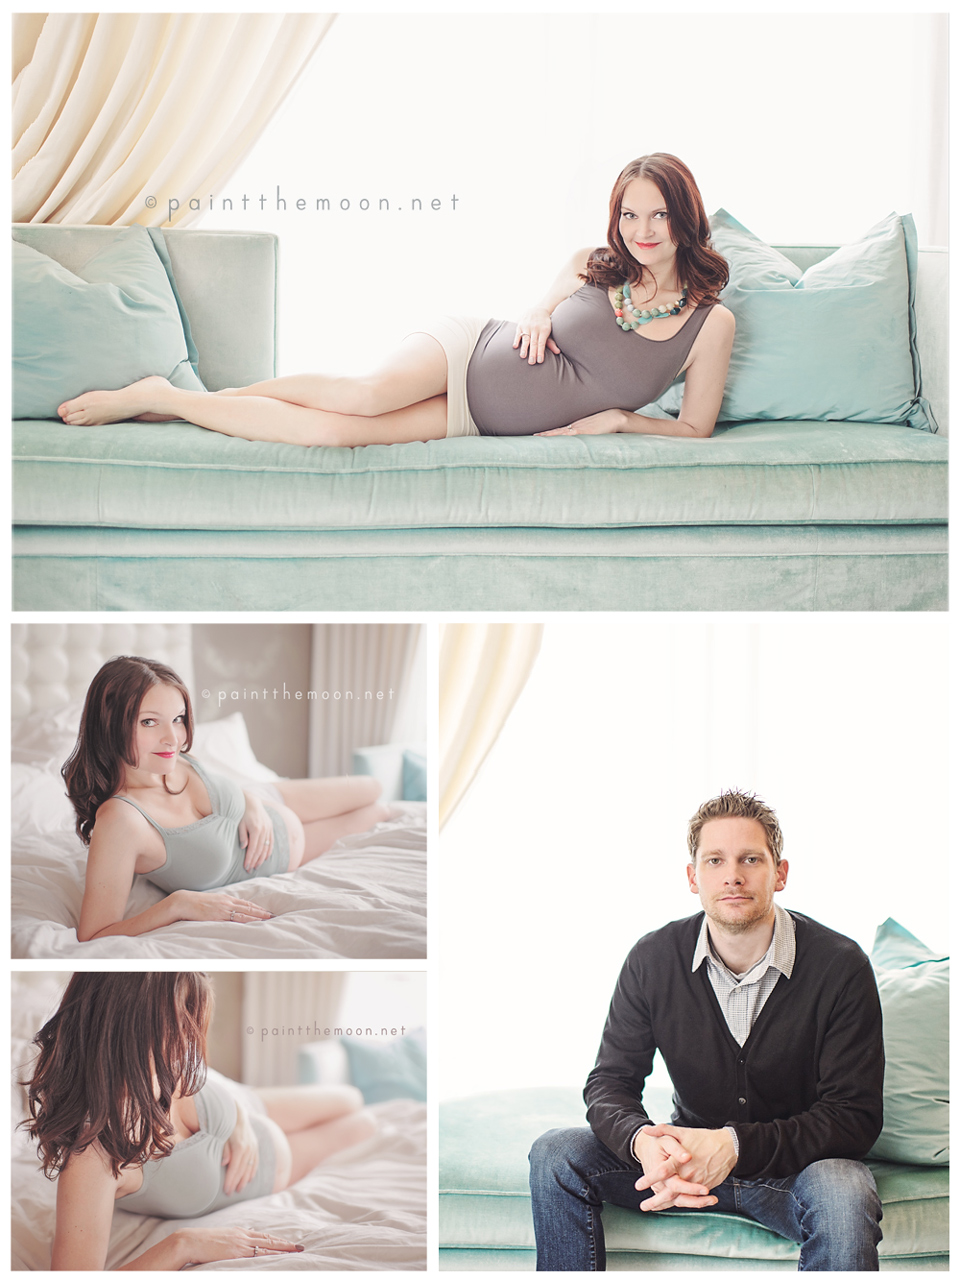 Maternity Photography | Soft, Indoor, Natural Light | Paint the Moon Photoshop Actions